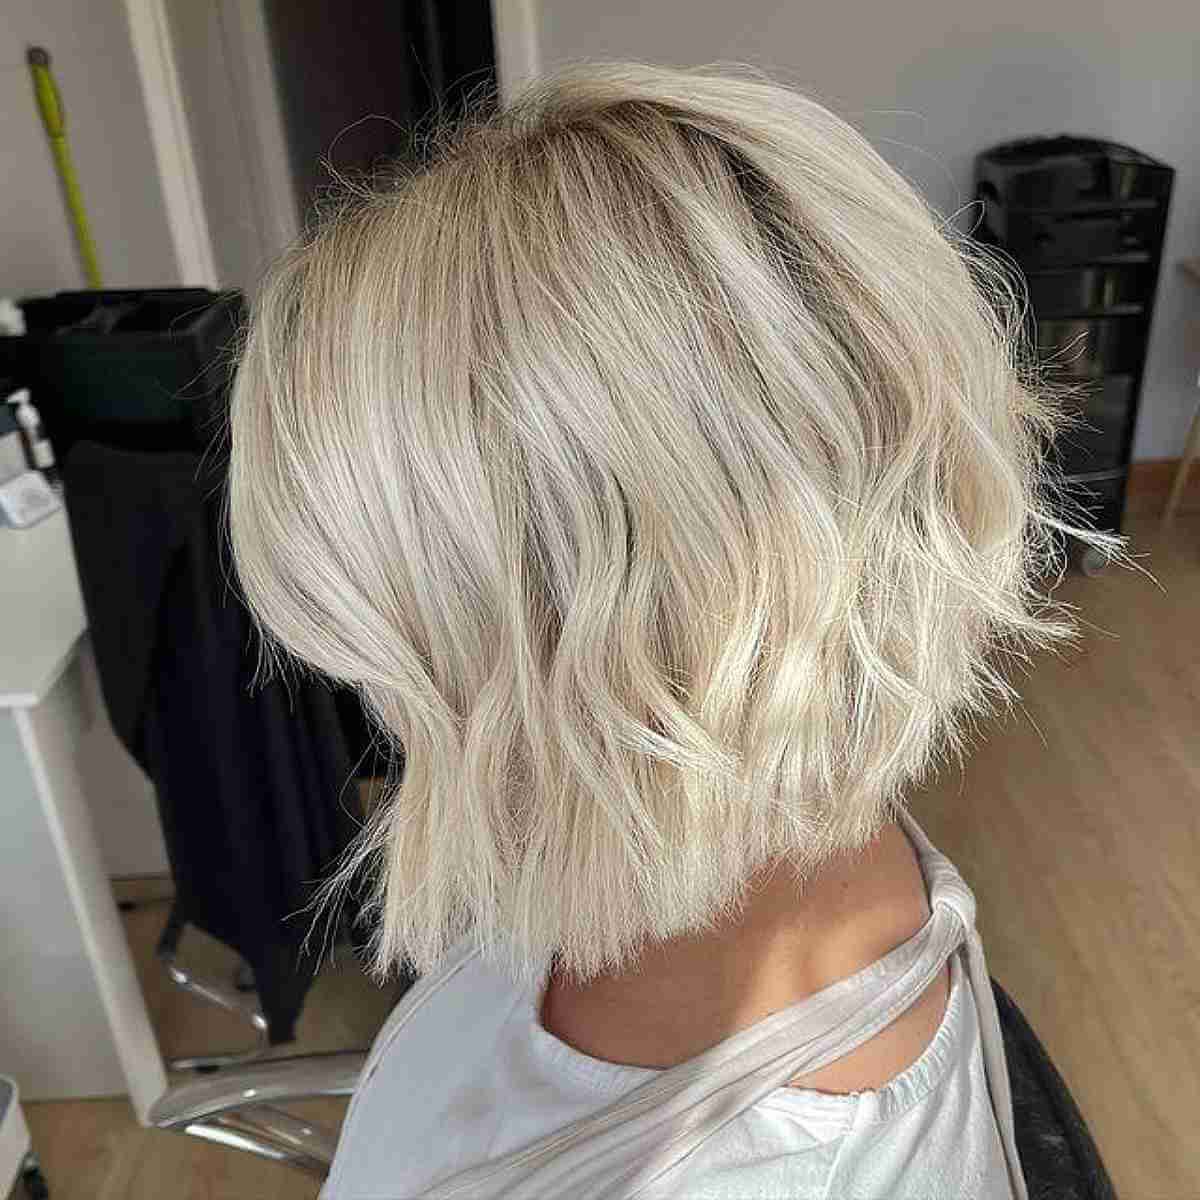 50+ Inverted Bob Haircuts Women Are Getting In 2022 Inside Current Icy Blonde Inverted Bob Haircuts (View 3 of 25)